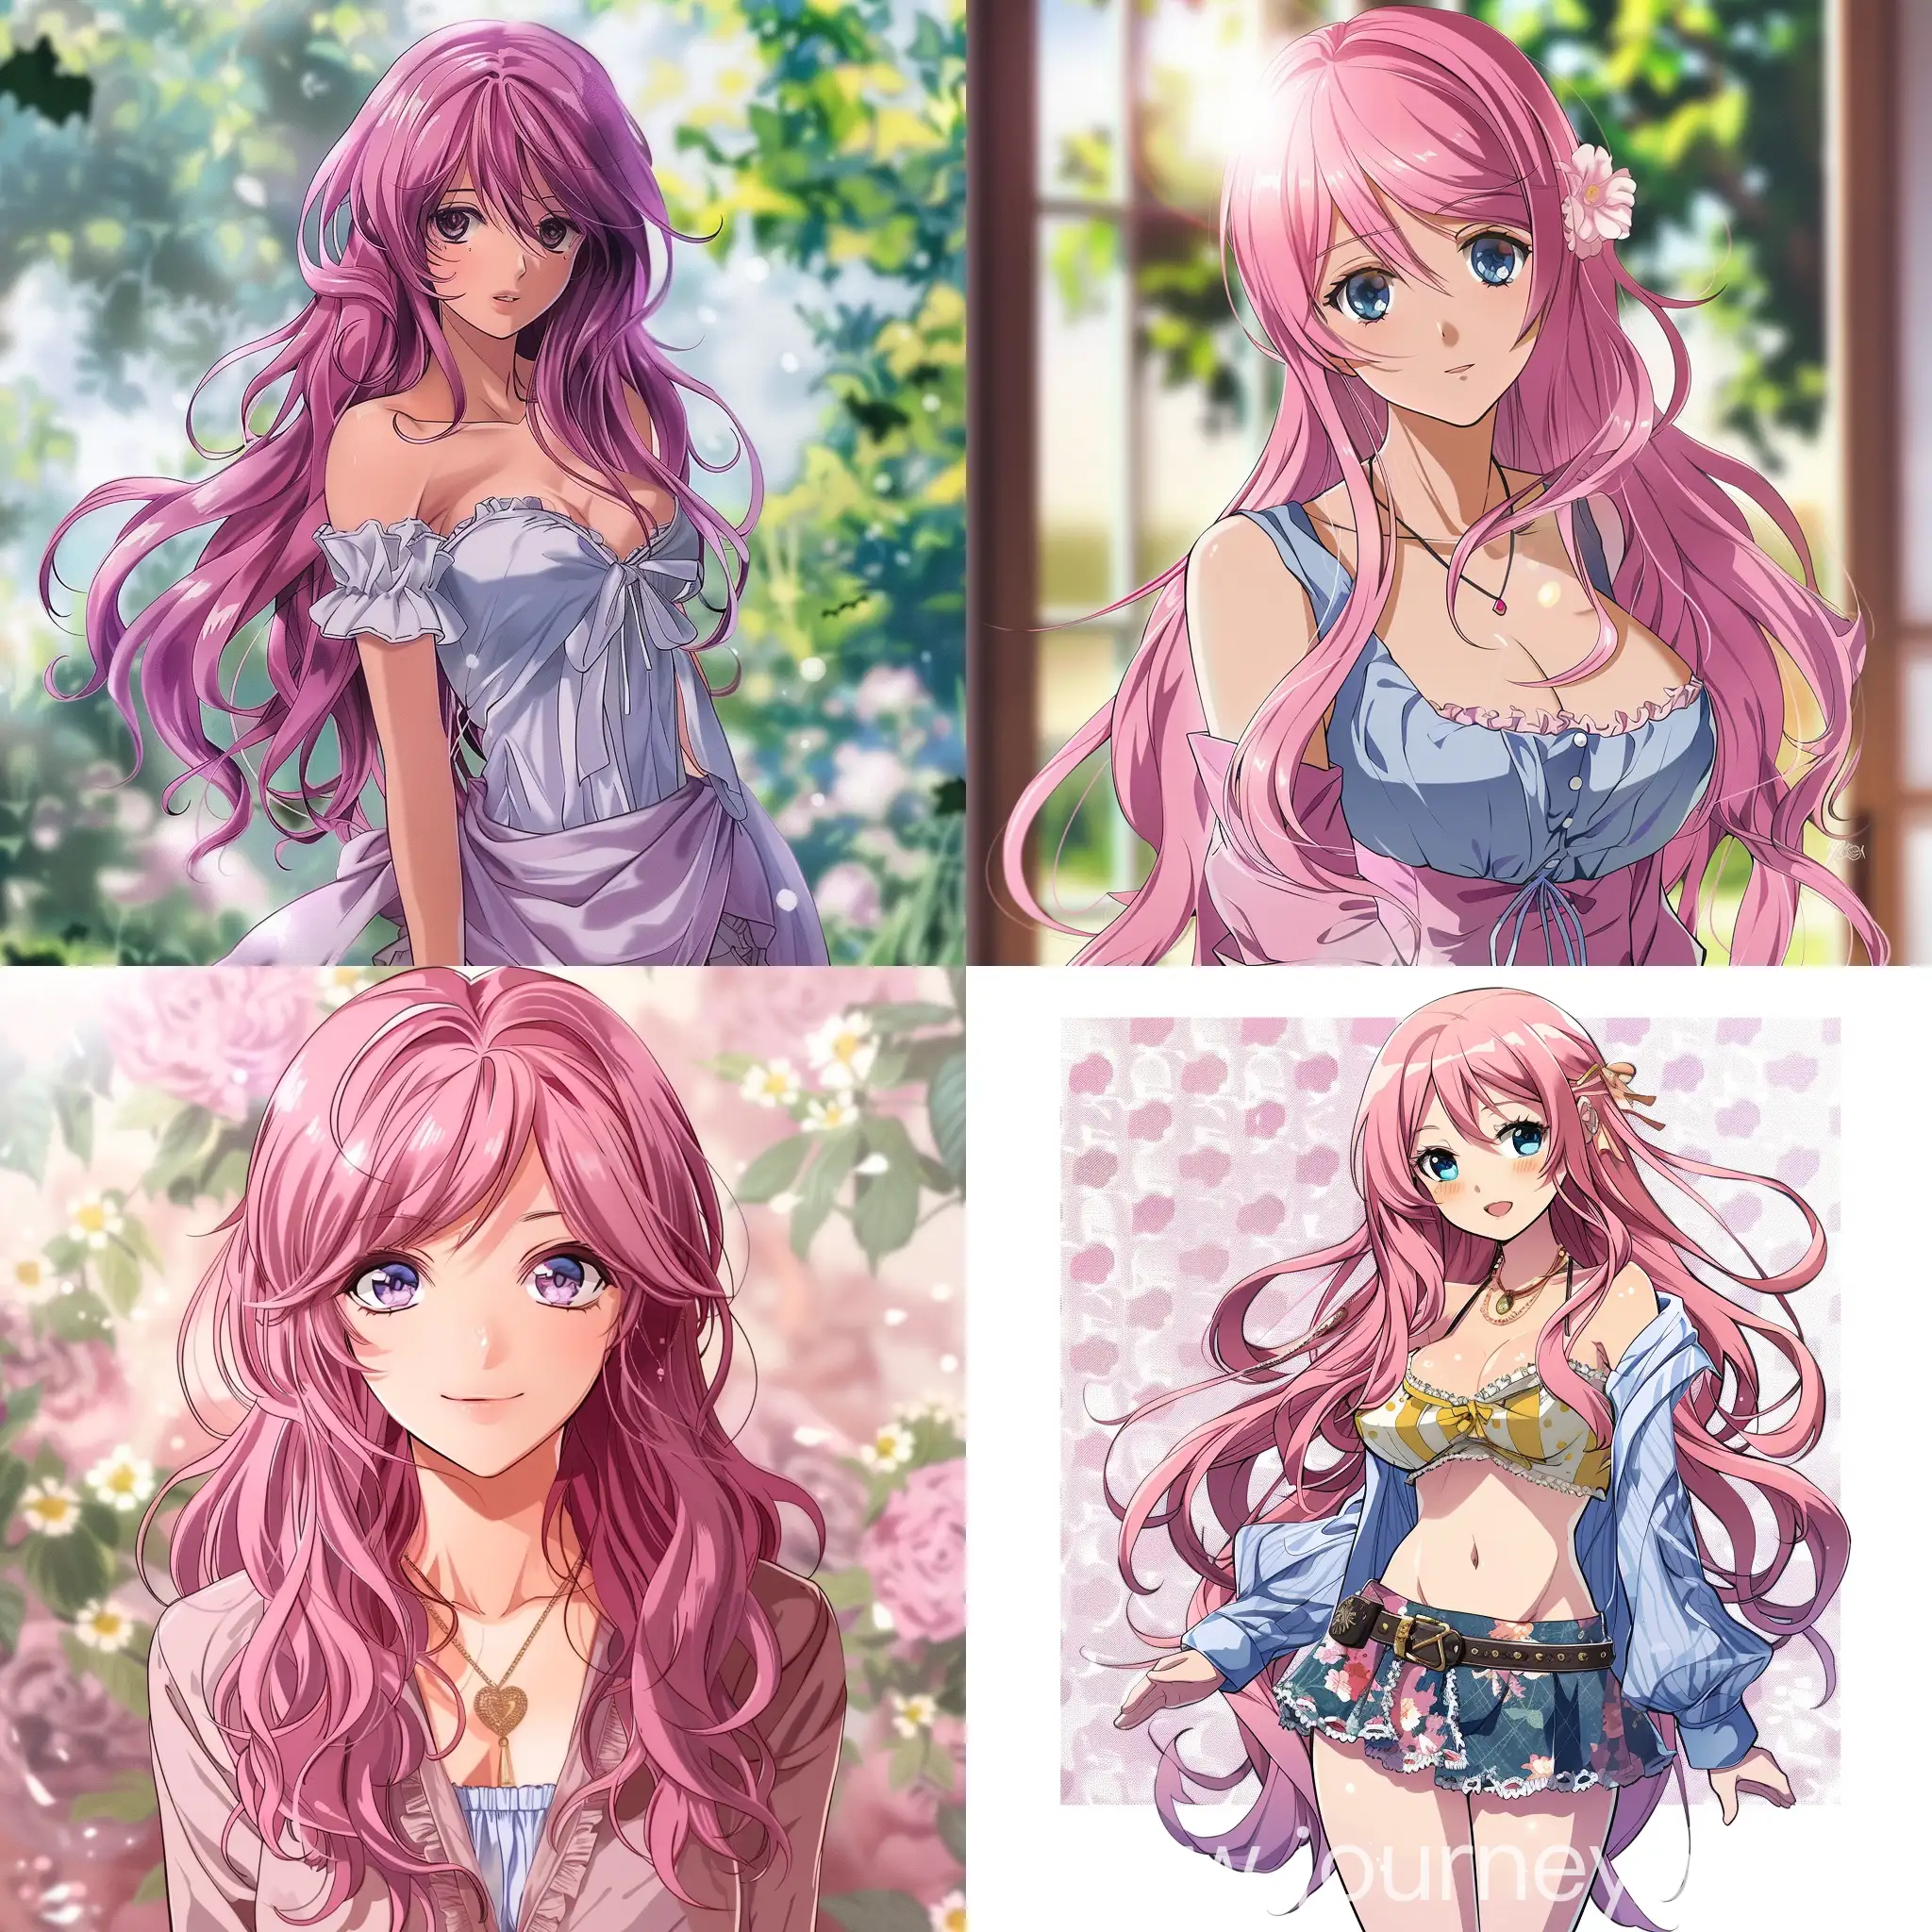 Beautiful-Anime-Girl-with-Long-Pink-Hair-in-Feminine-Attire